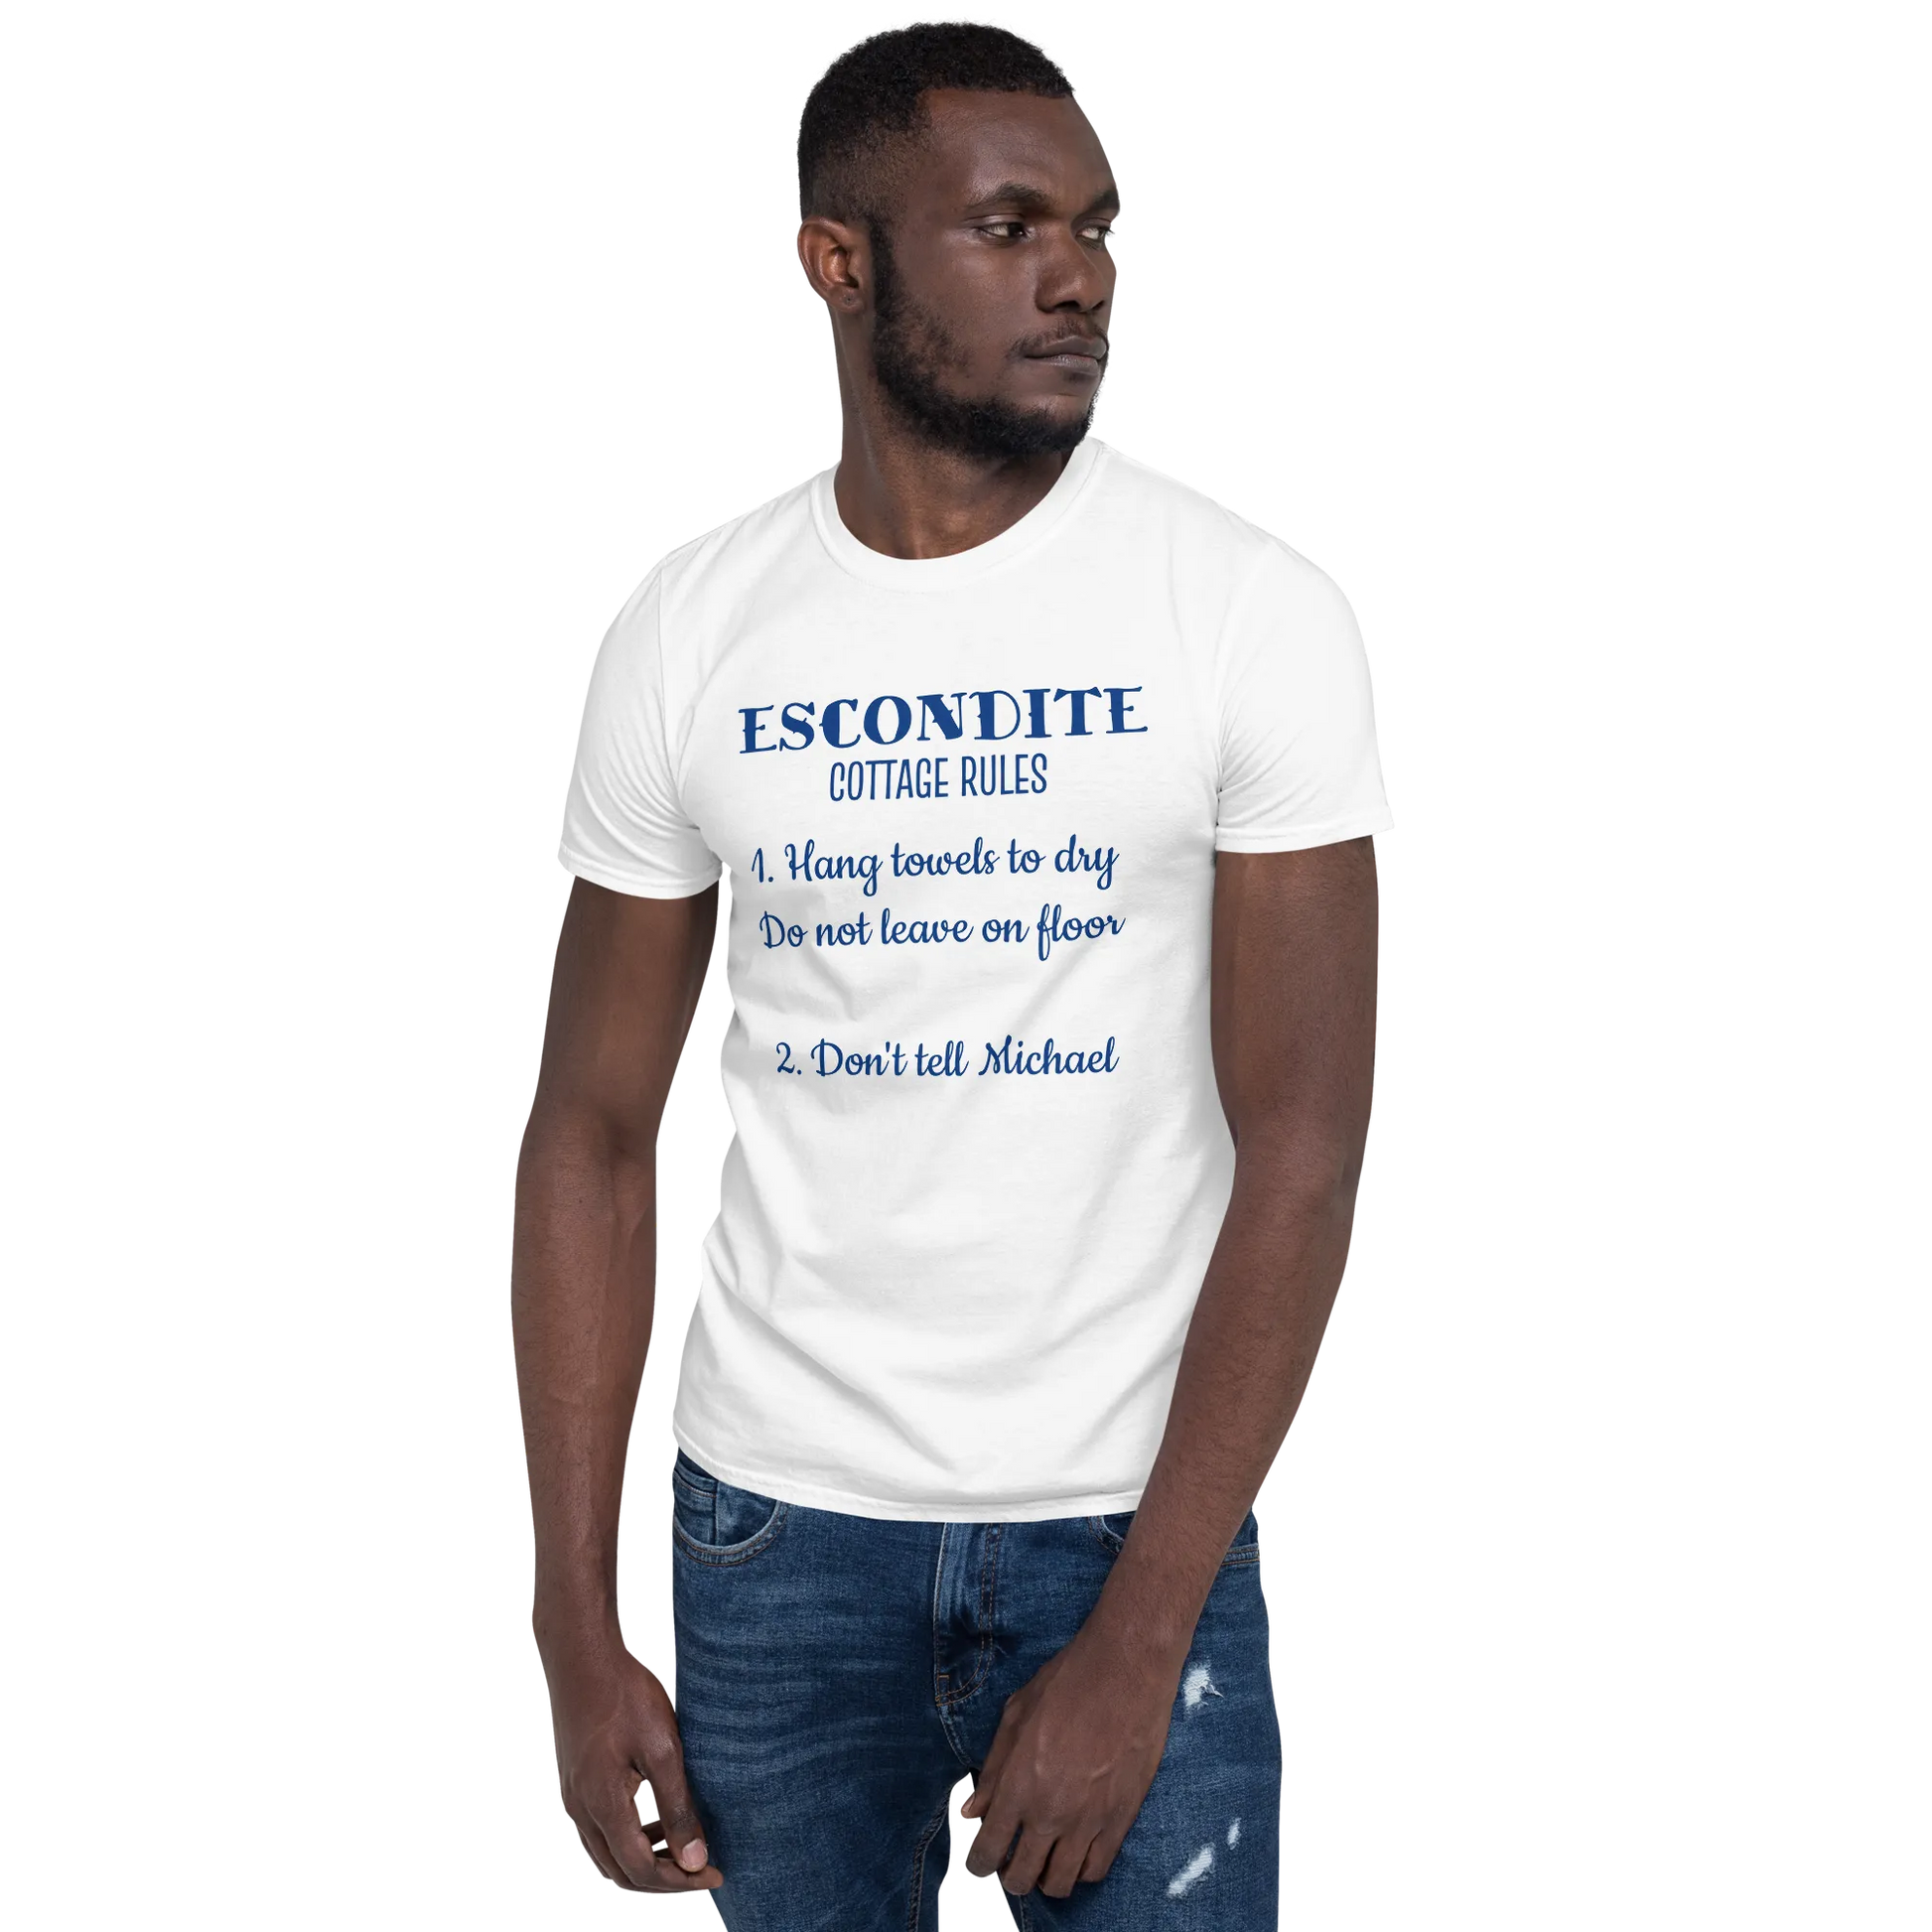 ESCONDITE Cottage Rules Tee in White on man right